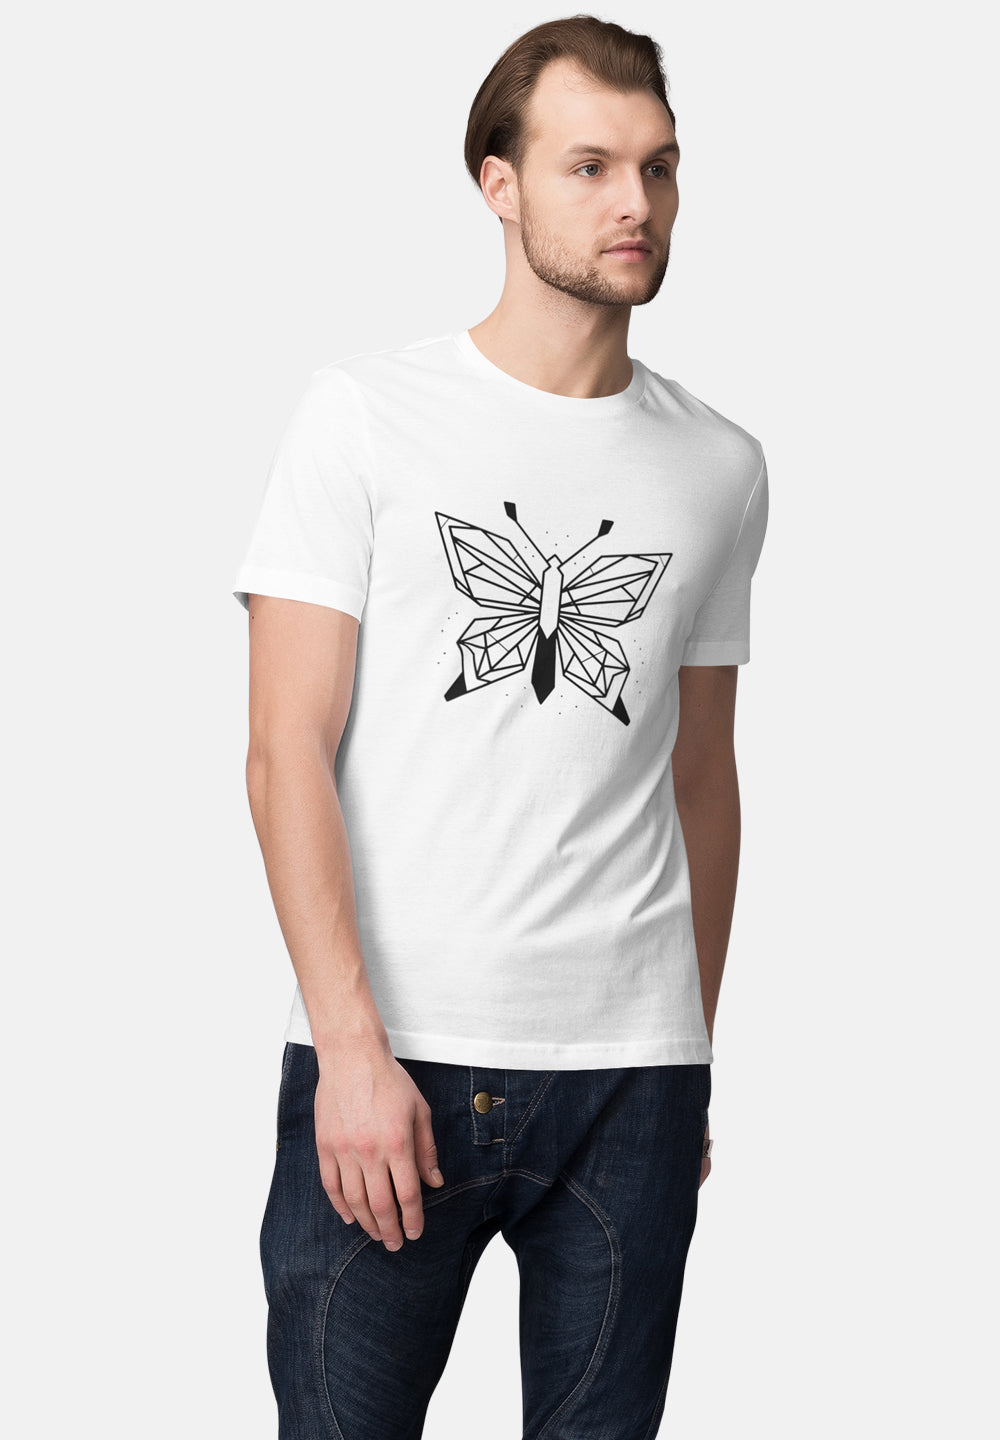 utf-8''Butterfly_lineart_geometric_style%20White%20Tee%20Front%20-1b92eb46-9143-413d-9990-1d7731a3a08e.jpg